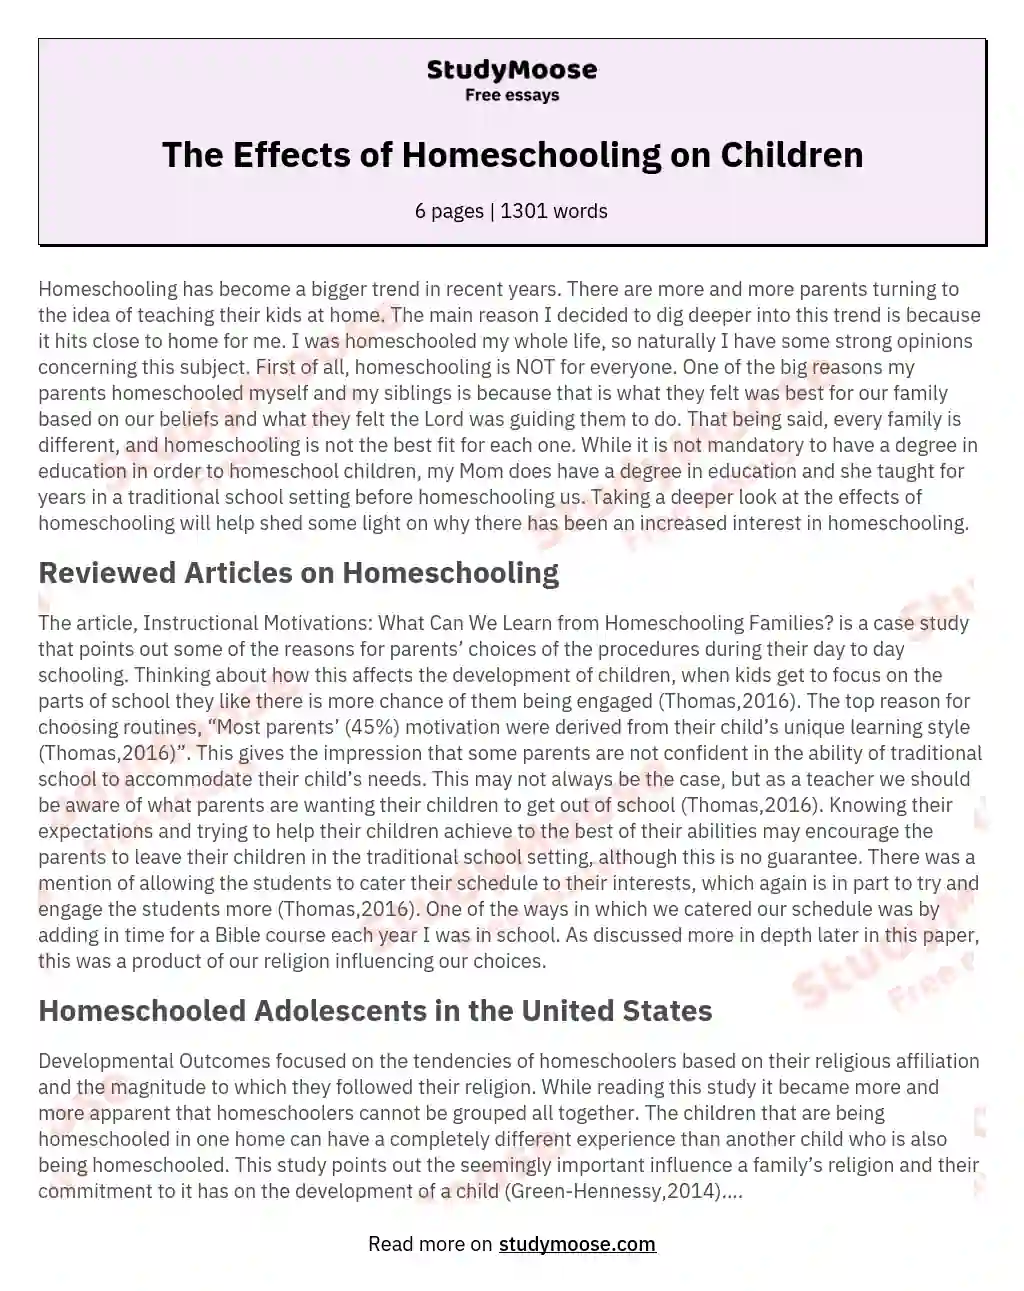 essay about homeschooling disadvantages